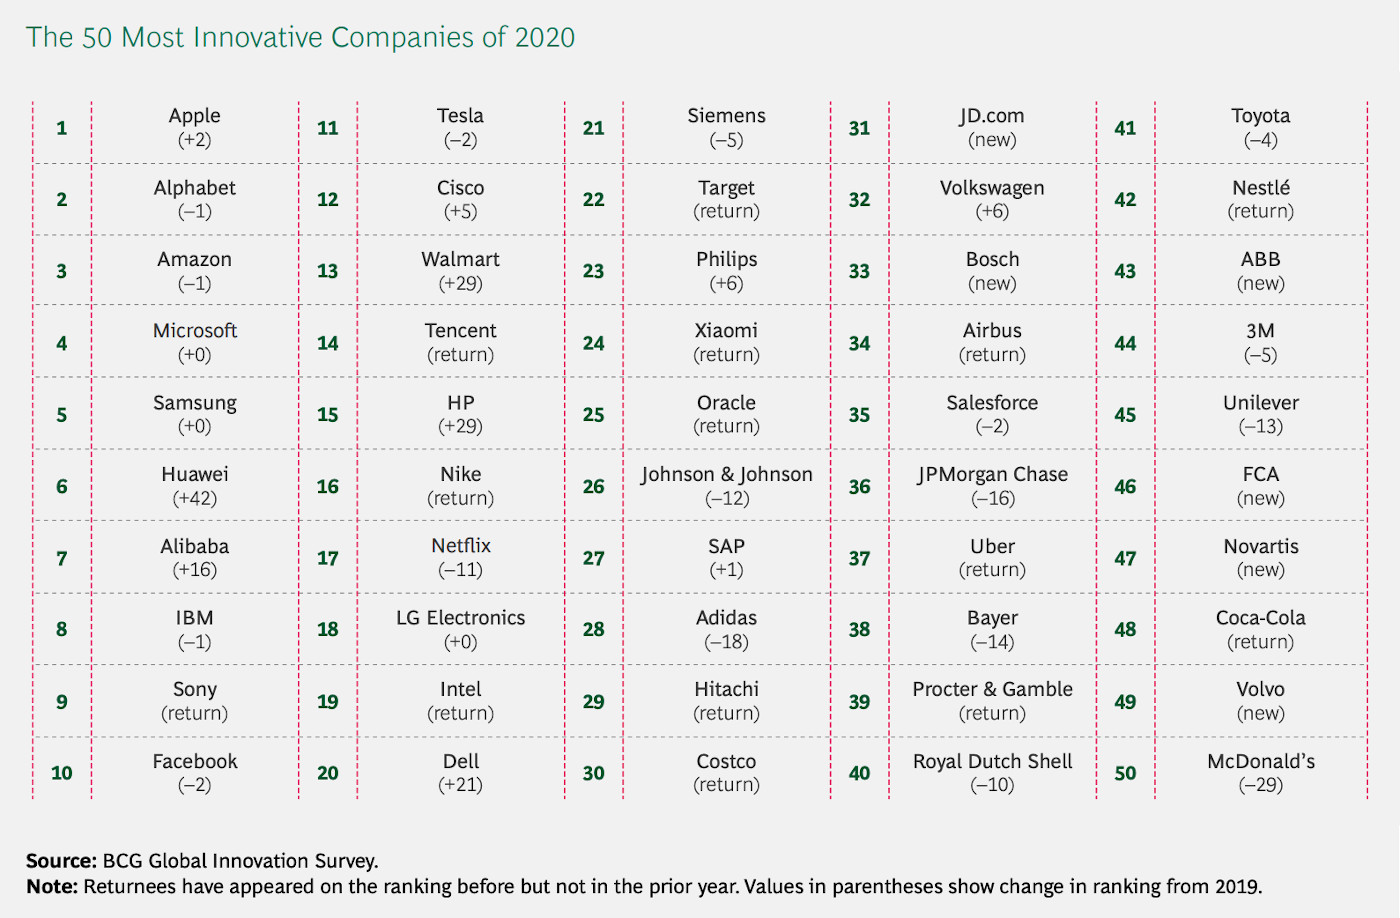 The 50 Most Innovative Companies of 2020